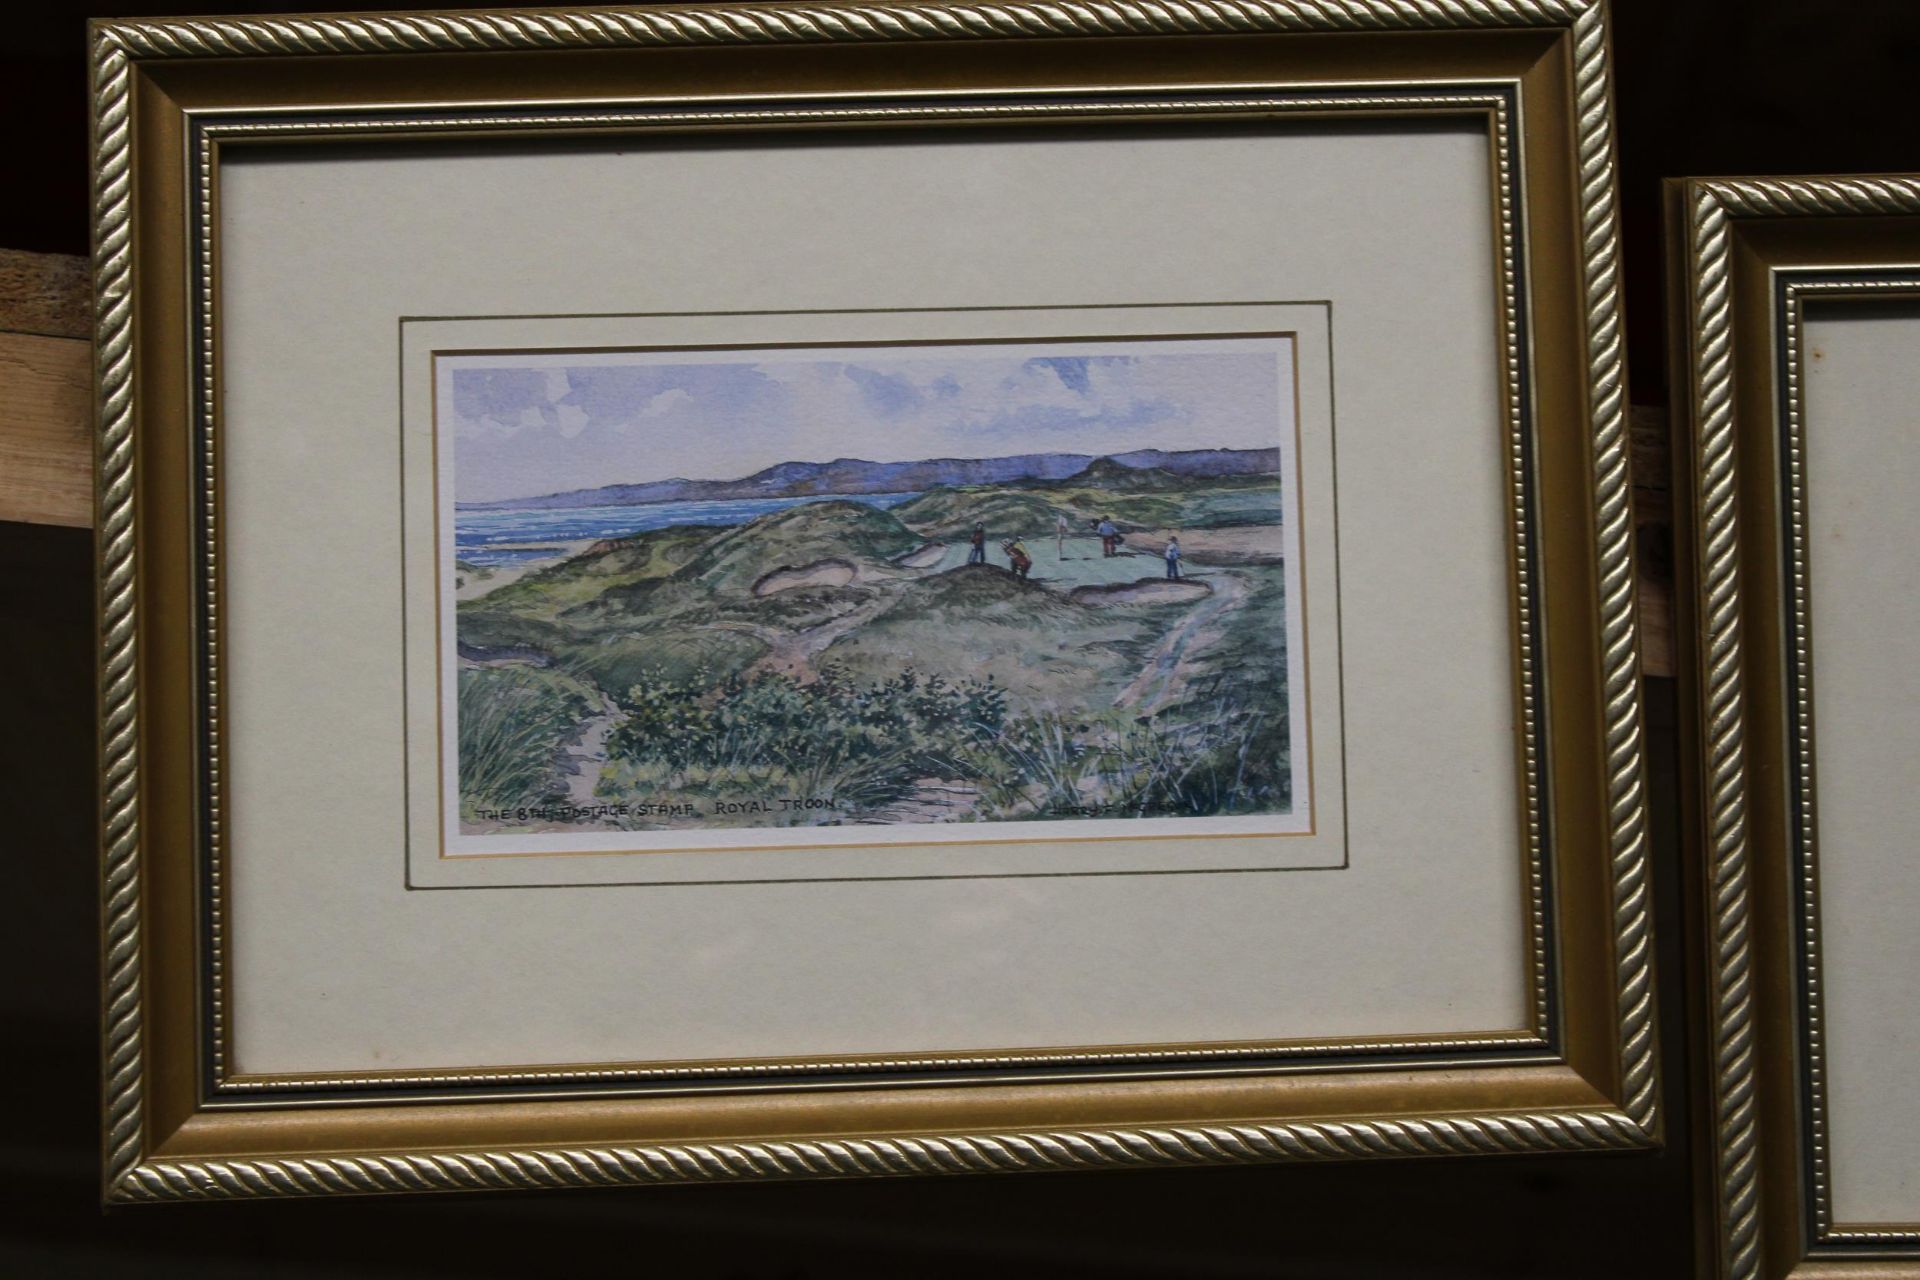 THREE FRAMED PRINTS OF GOLF COURSES TO INCLUDE, GLENEAGLES, ROYAL TROON AND MUIRFIELD - Image 3 of 6